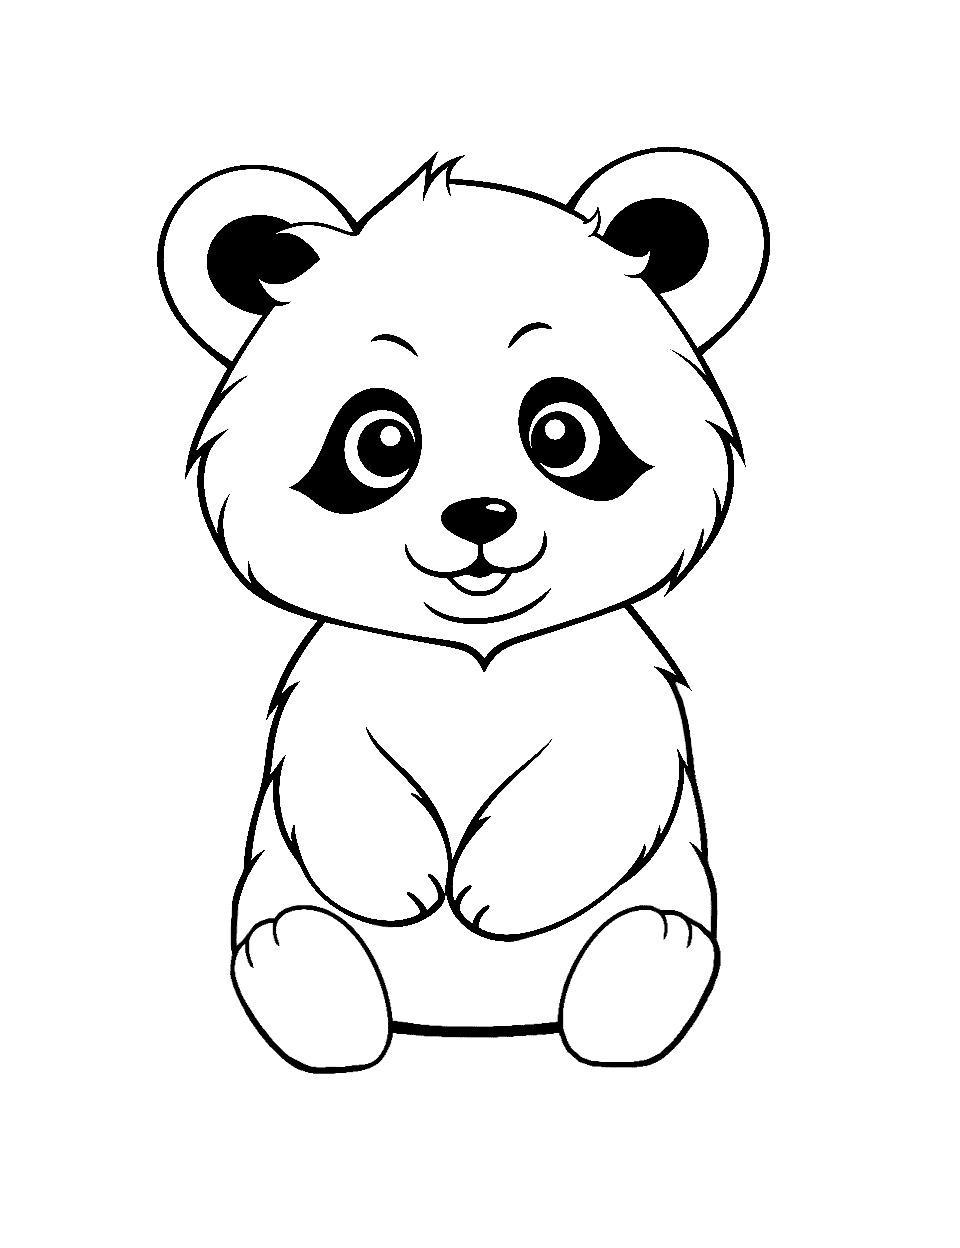 Turning Red Inspired Panda Coloring Page - A panda with aspects that are inspired by the “Turning Red” animation style.